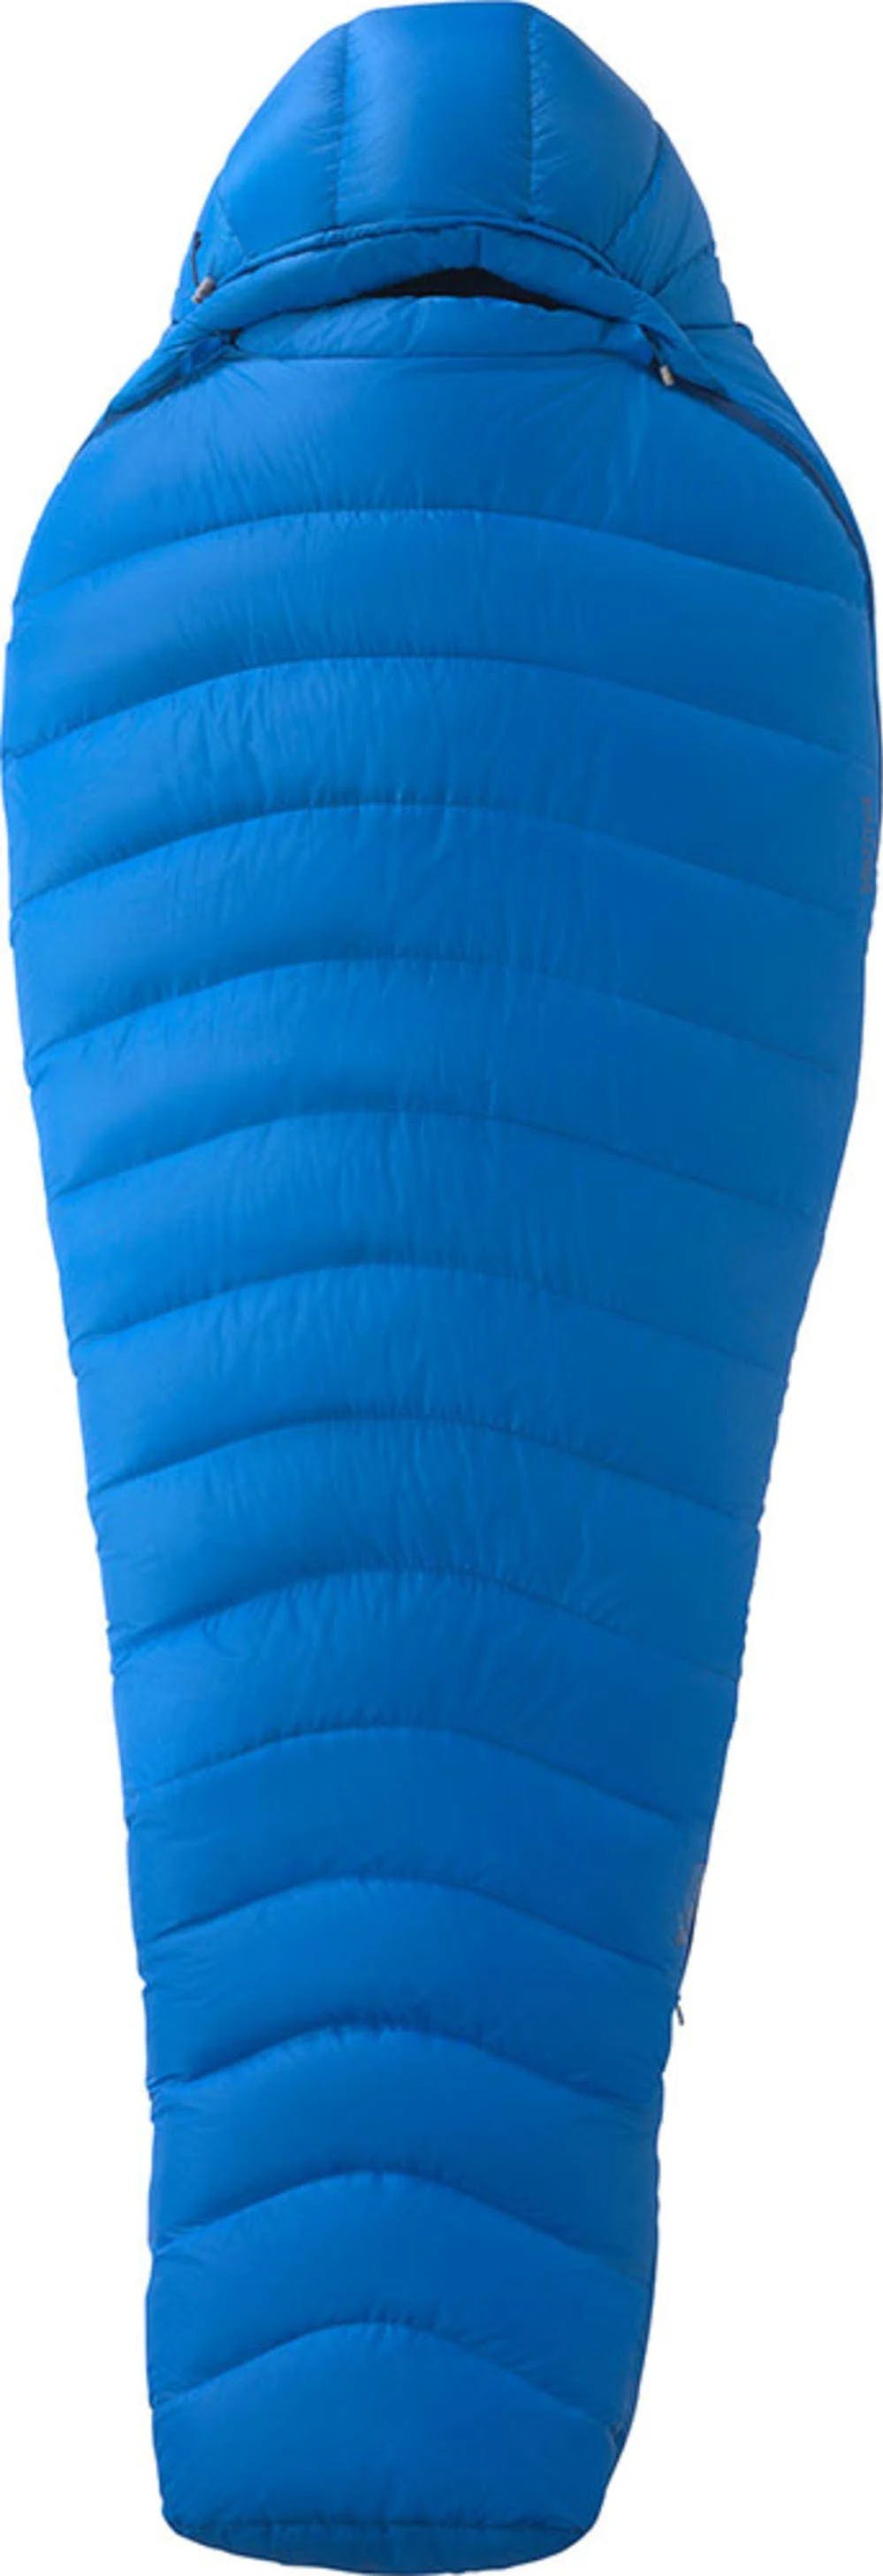 A product image of the Marmot Helium Sleeping Bag in Cobalt Blue/Blue Night.